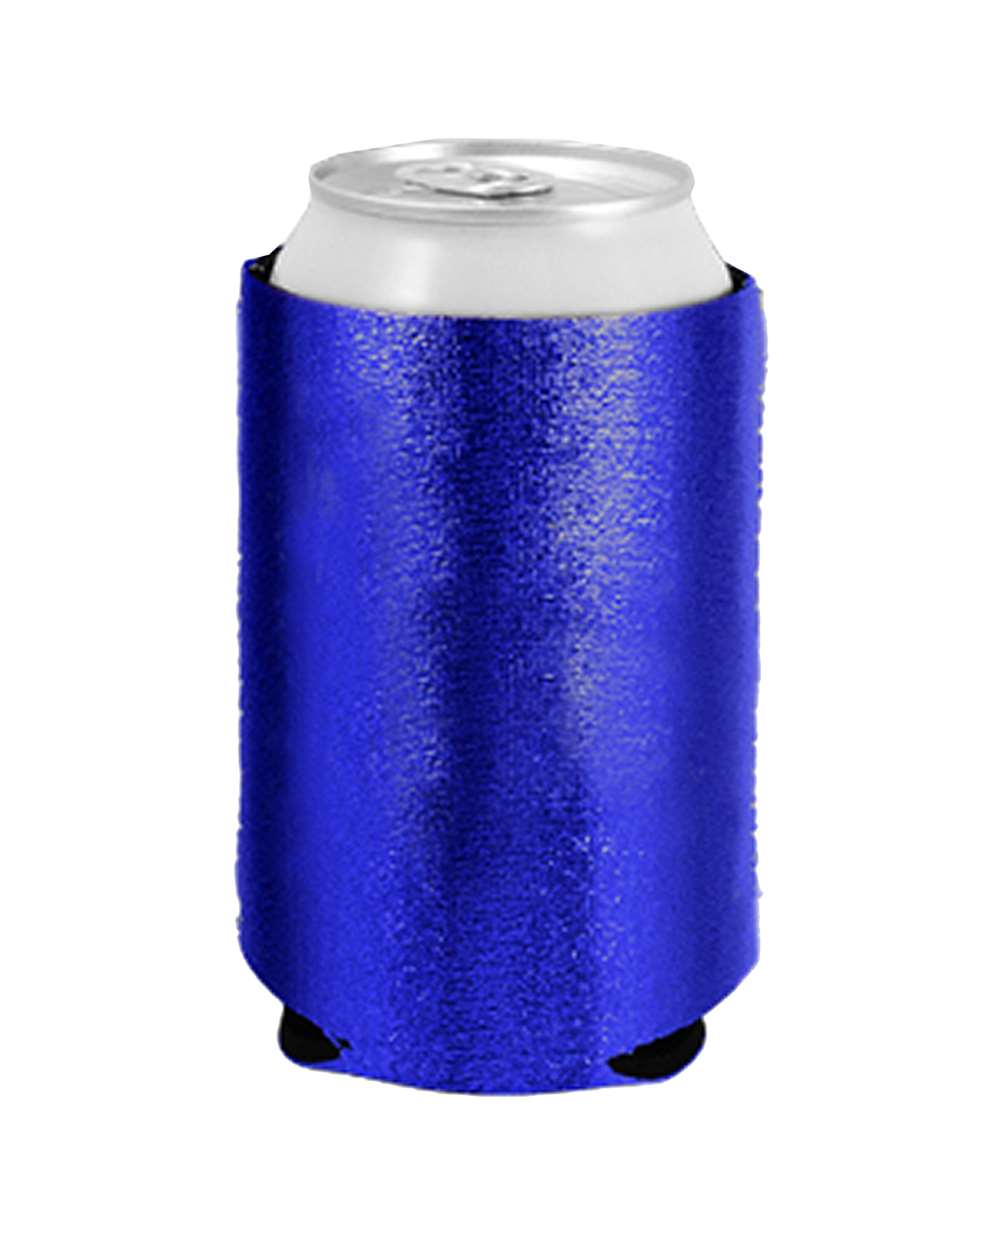 Design Custom Printed Foldable Neoprene Can Coolers Online at